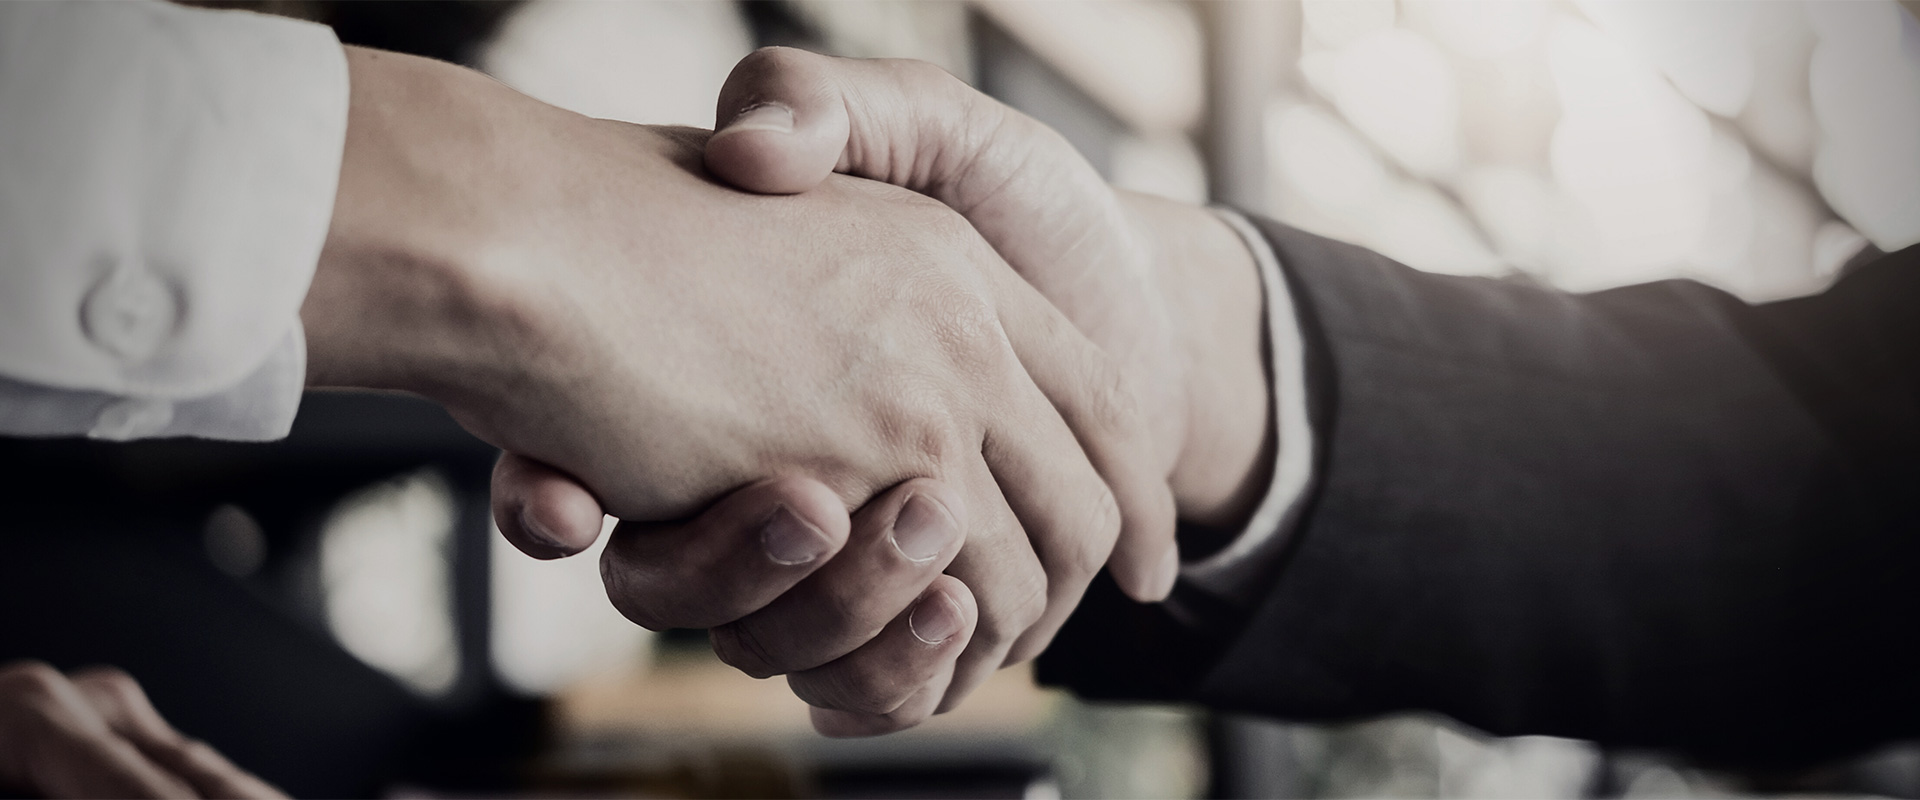 Close up image of two people in corporate clothing shaking hands